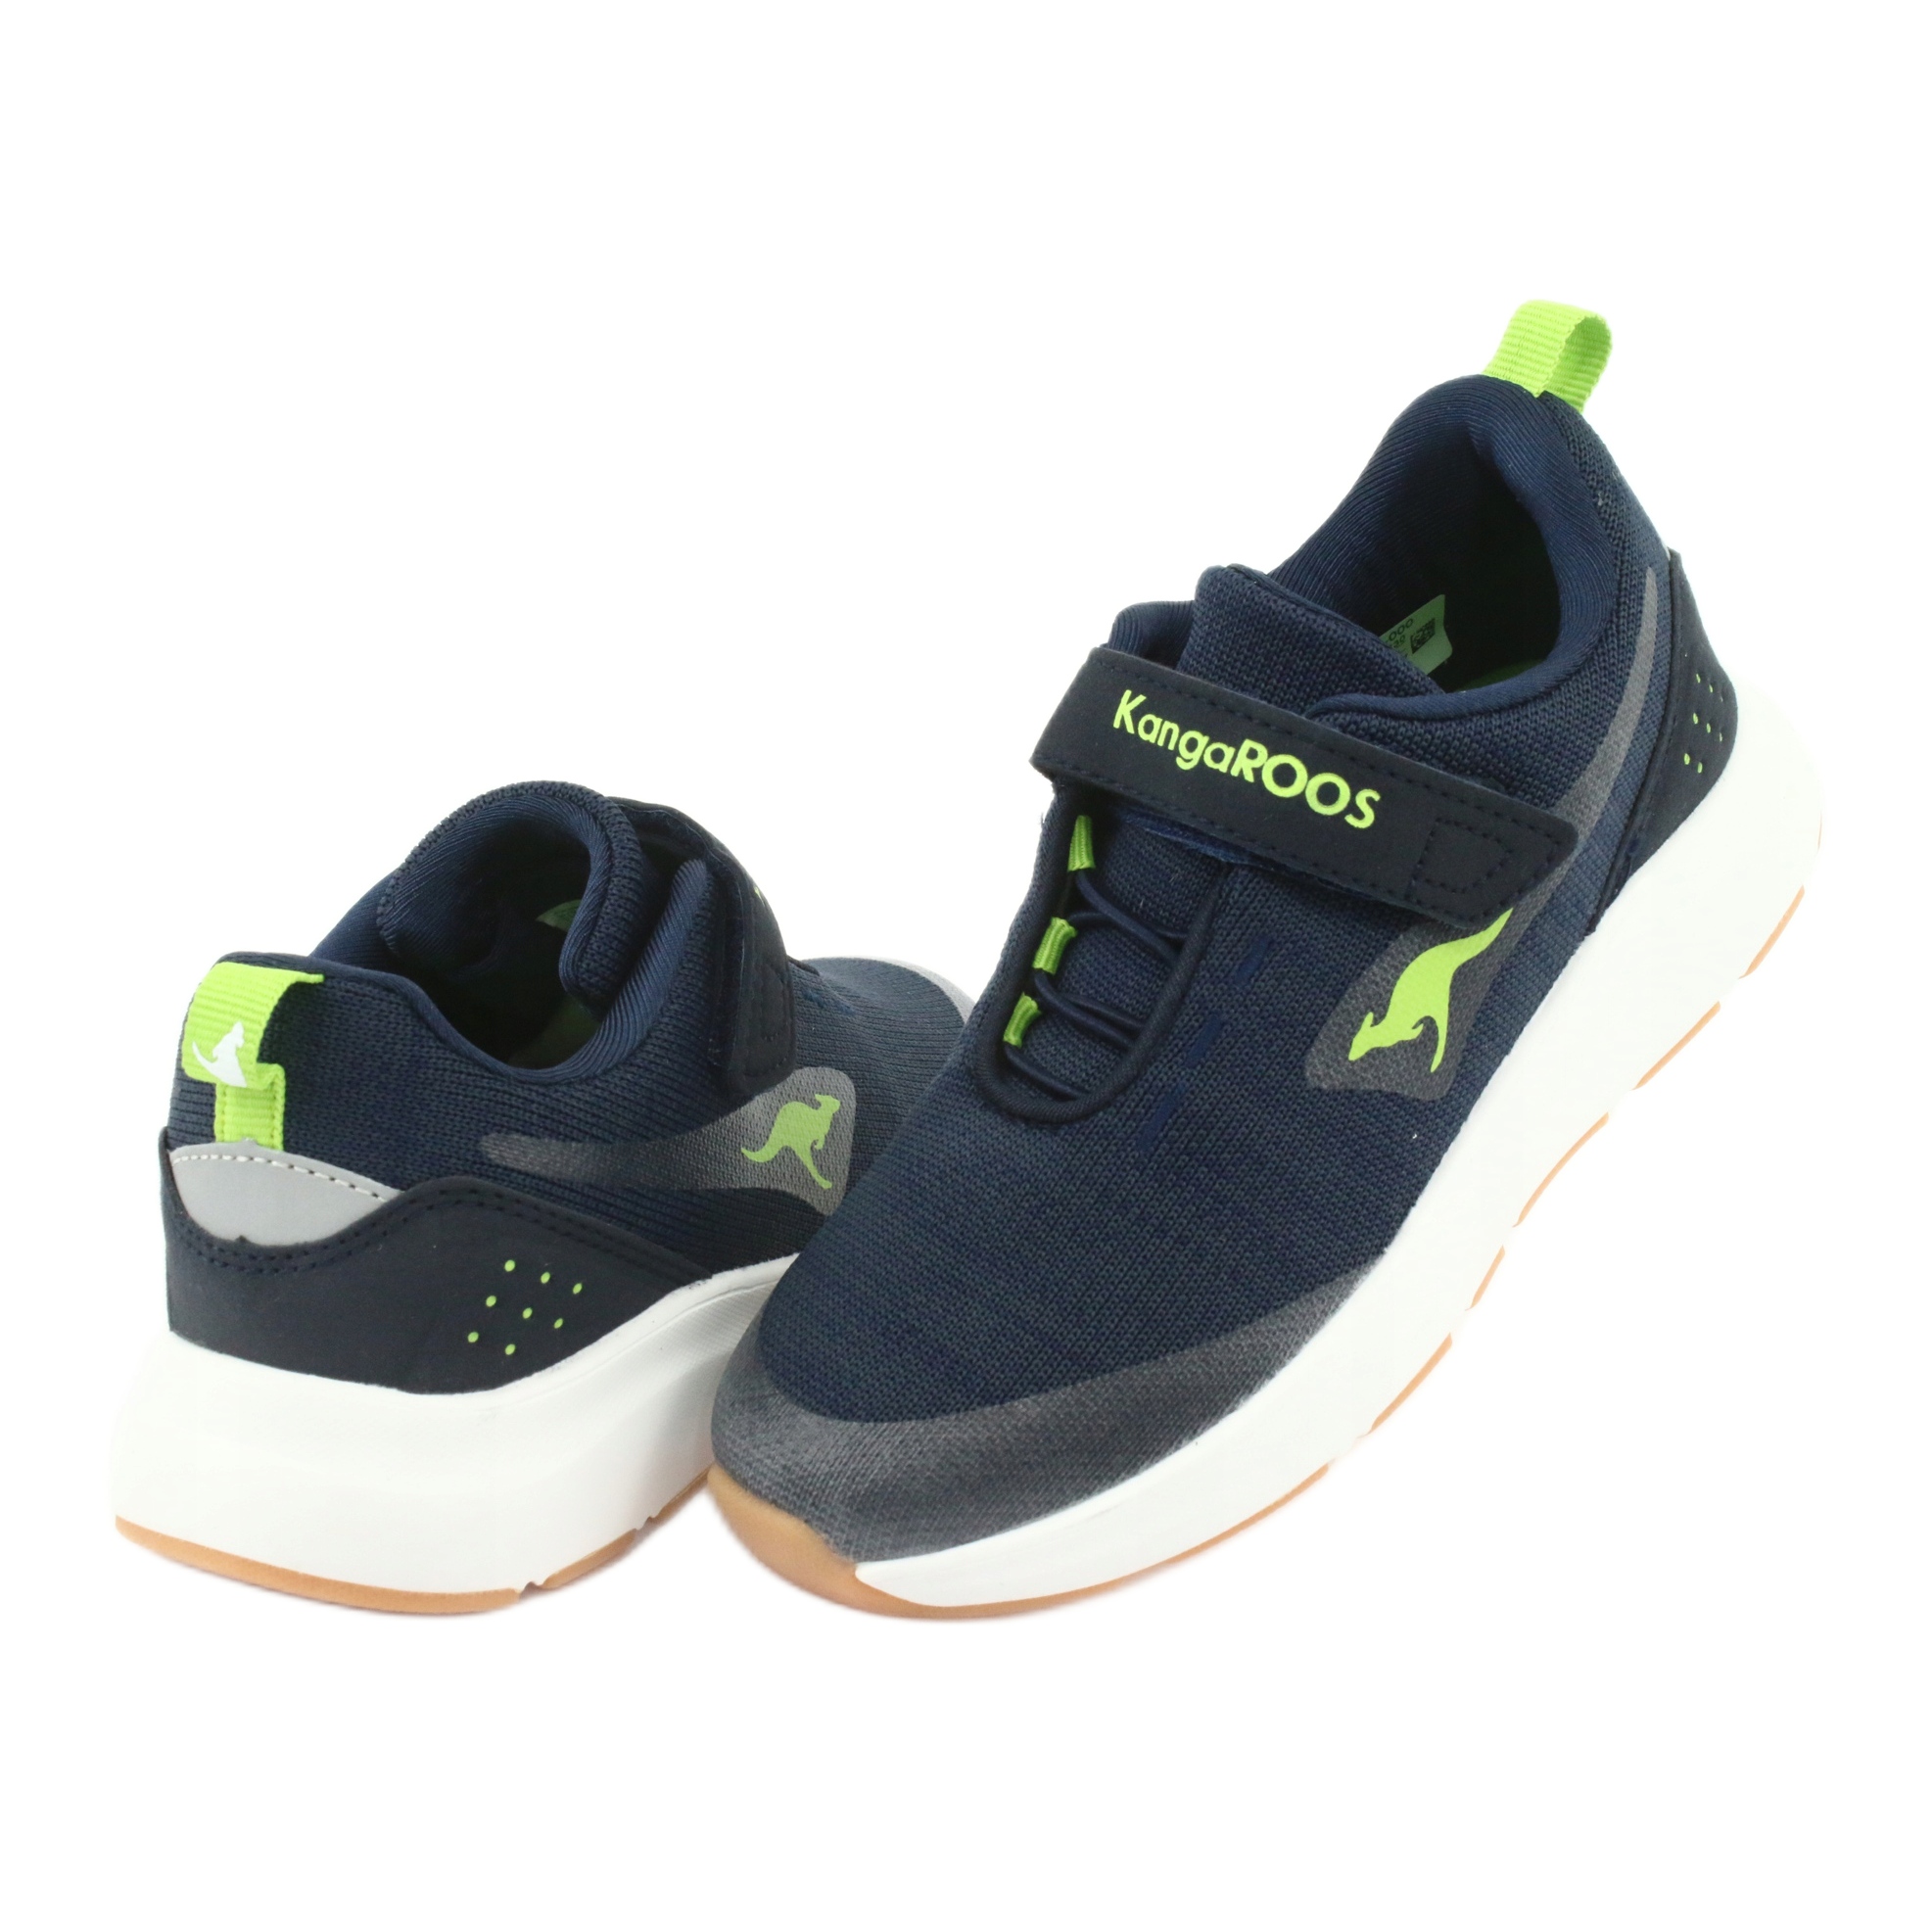 KangaROOS sports with Velcro navy / lime green - KeeShoes